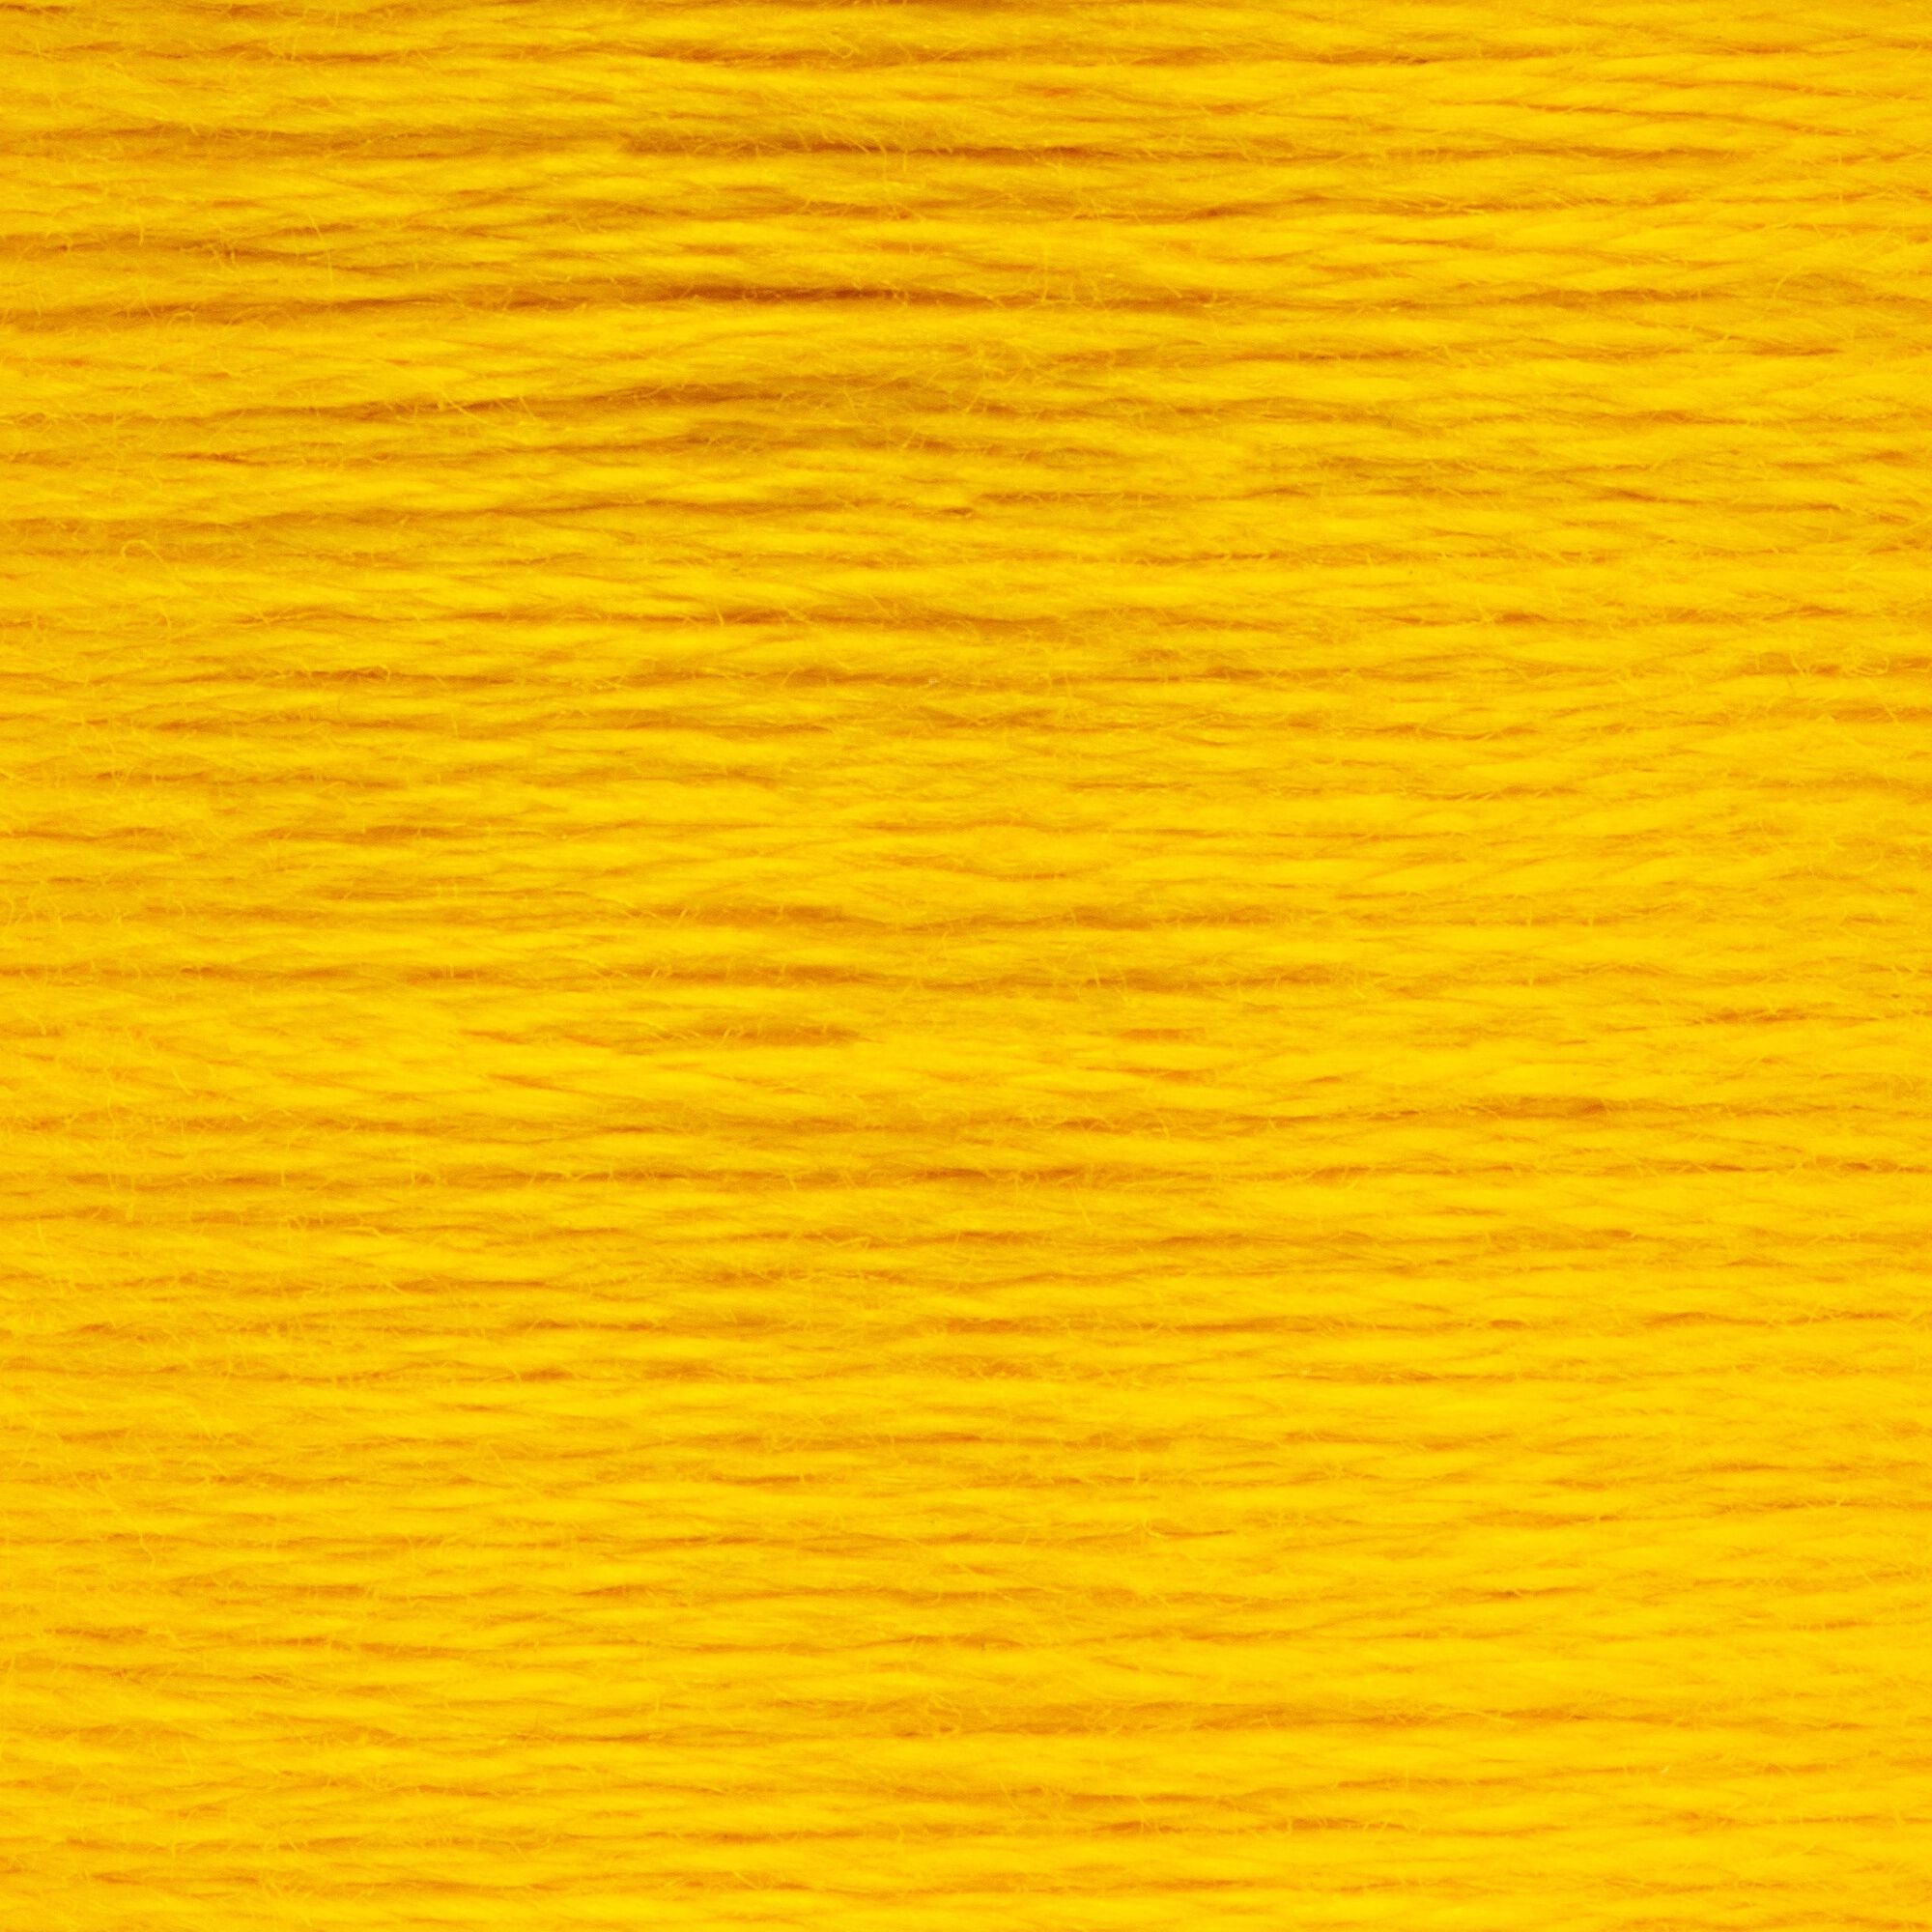 Anchor Embroidery Floss in Canary Yellow Dk